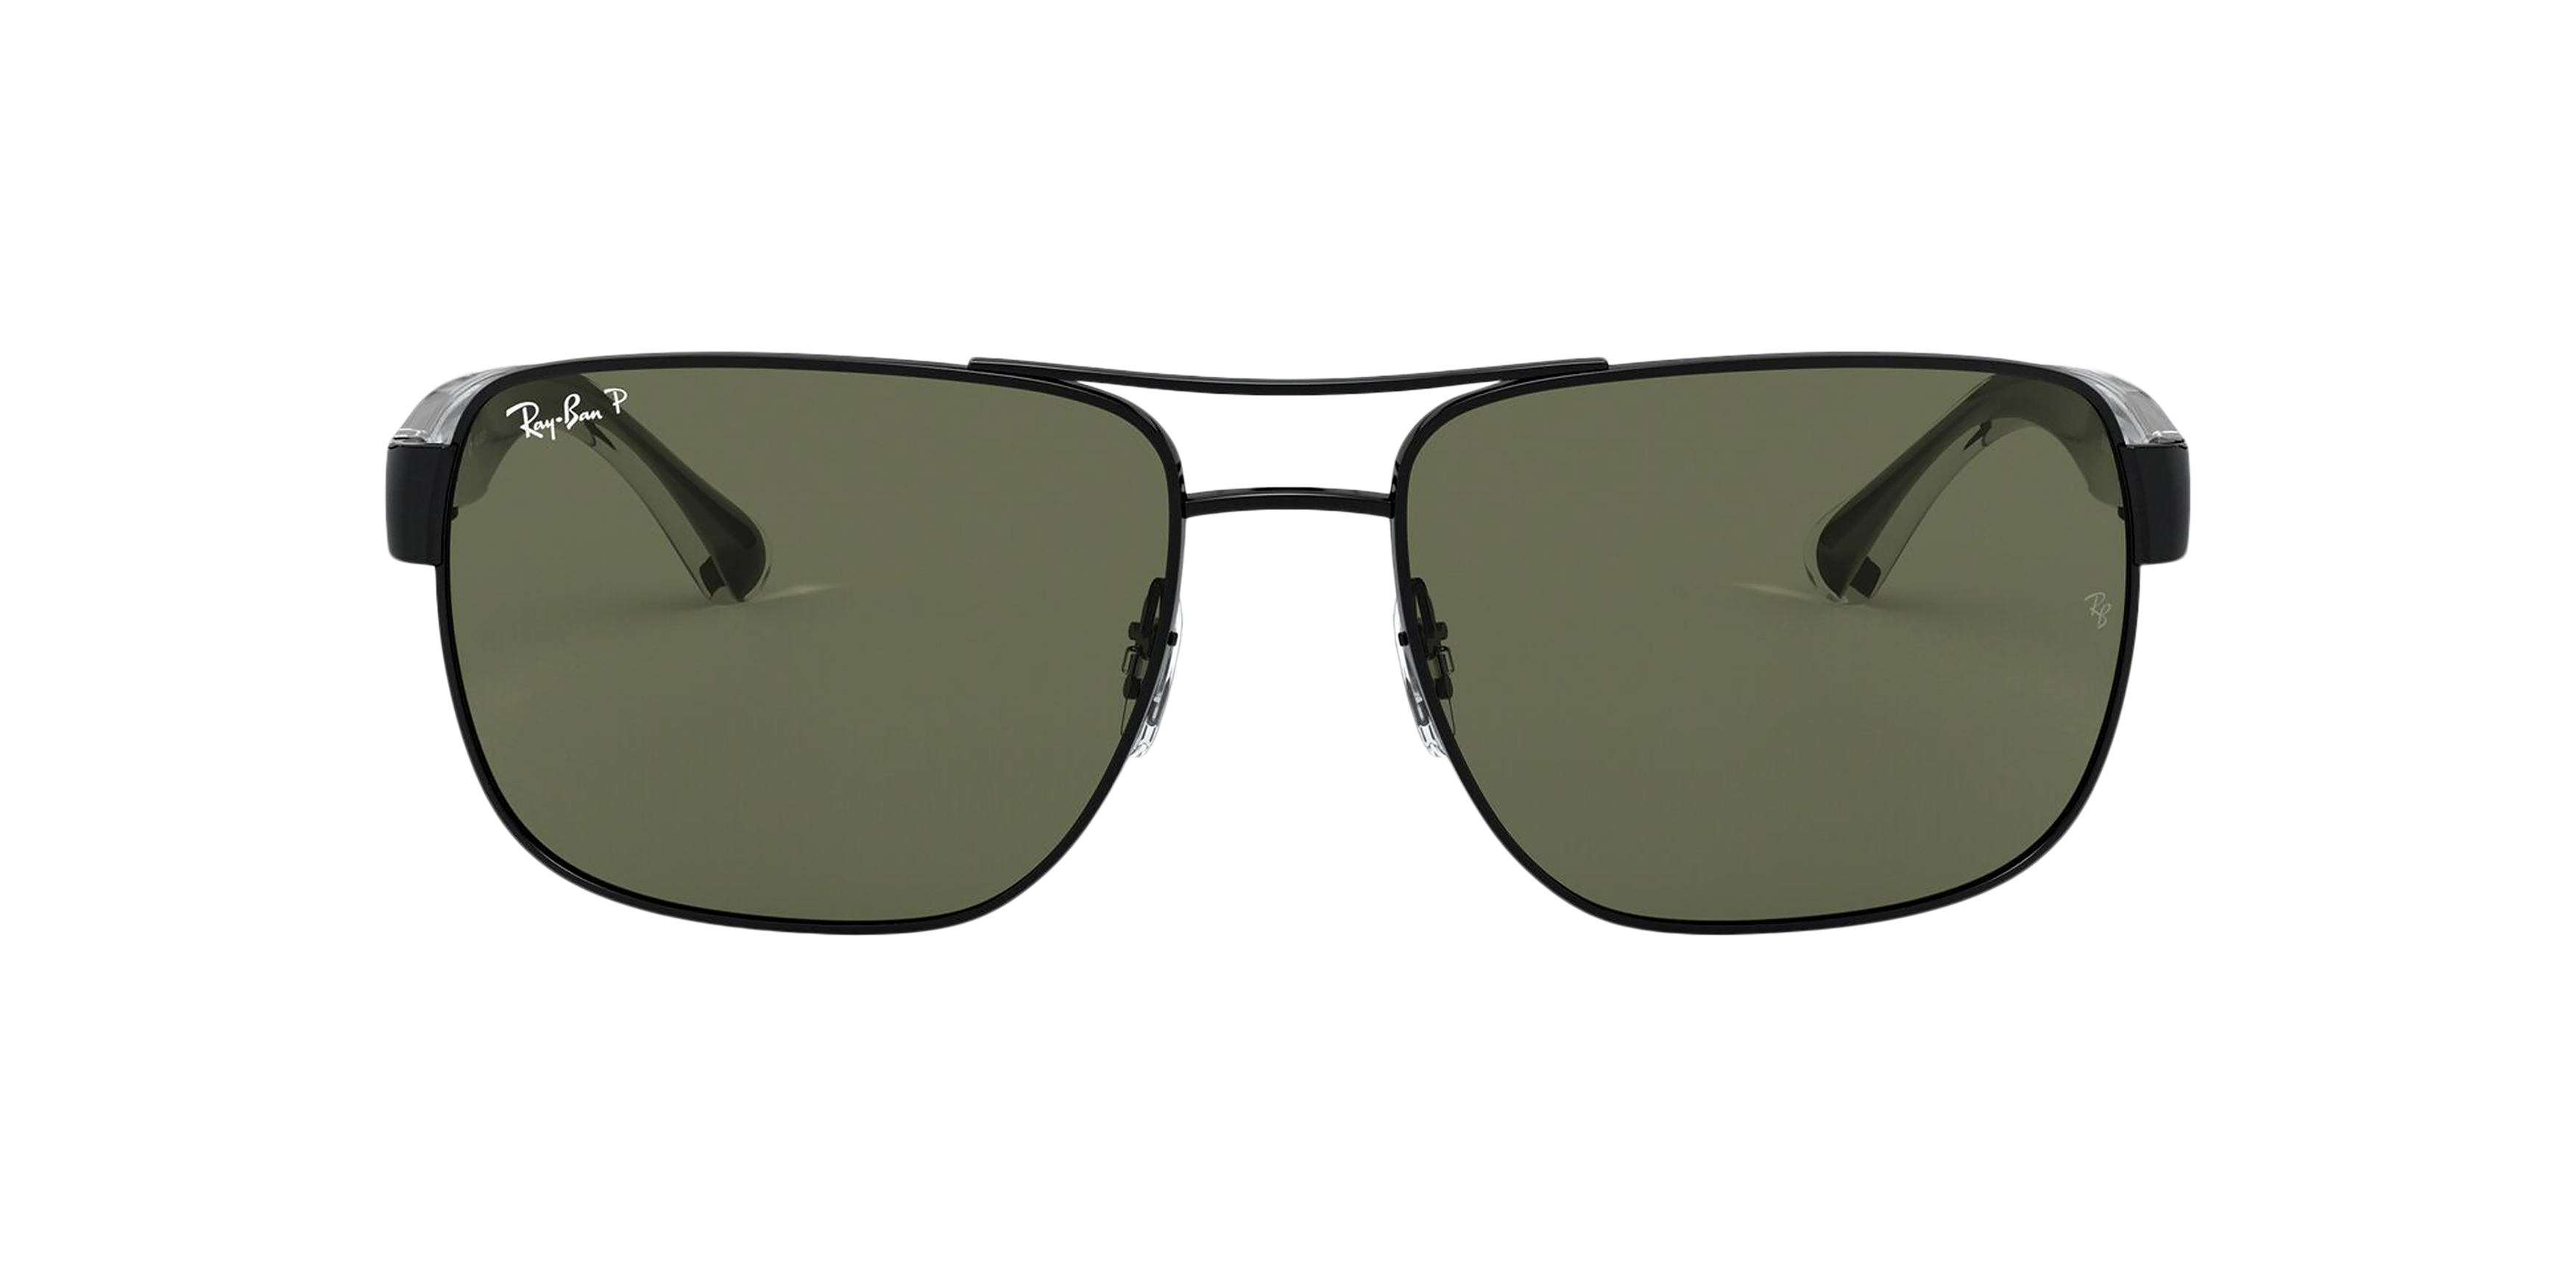 [products.image.front] Ray-Ban RB3530 002/9A